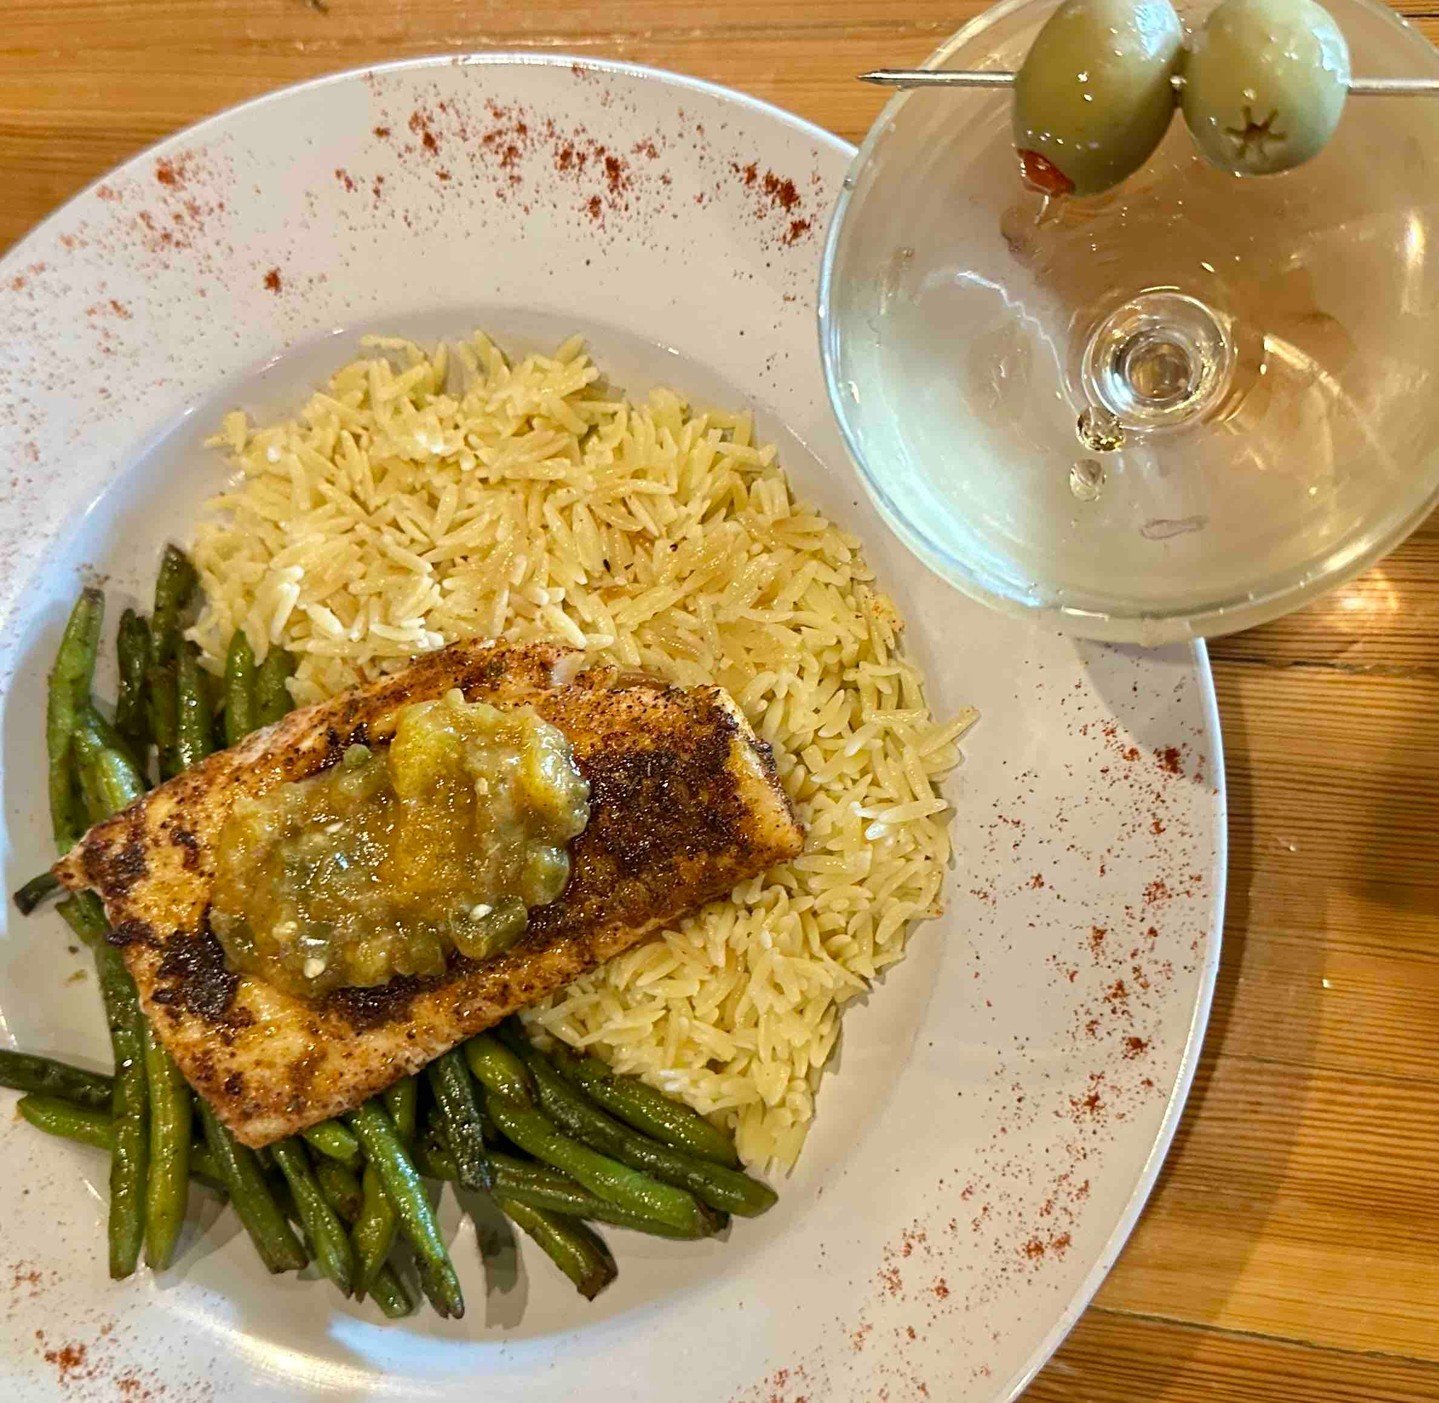 🌟 **Weekend Specials Alert at St. Nicholas Brewing Company in Du Quoin!** 🌟

Get ready to tantalize your taste buds this May 3/4 weekend with our mouth-watering specials! Dive into our **Grilled Mahi** featuring a perfectly grilled Mahi Mahi filet 